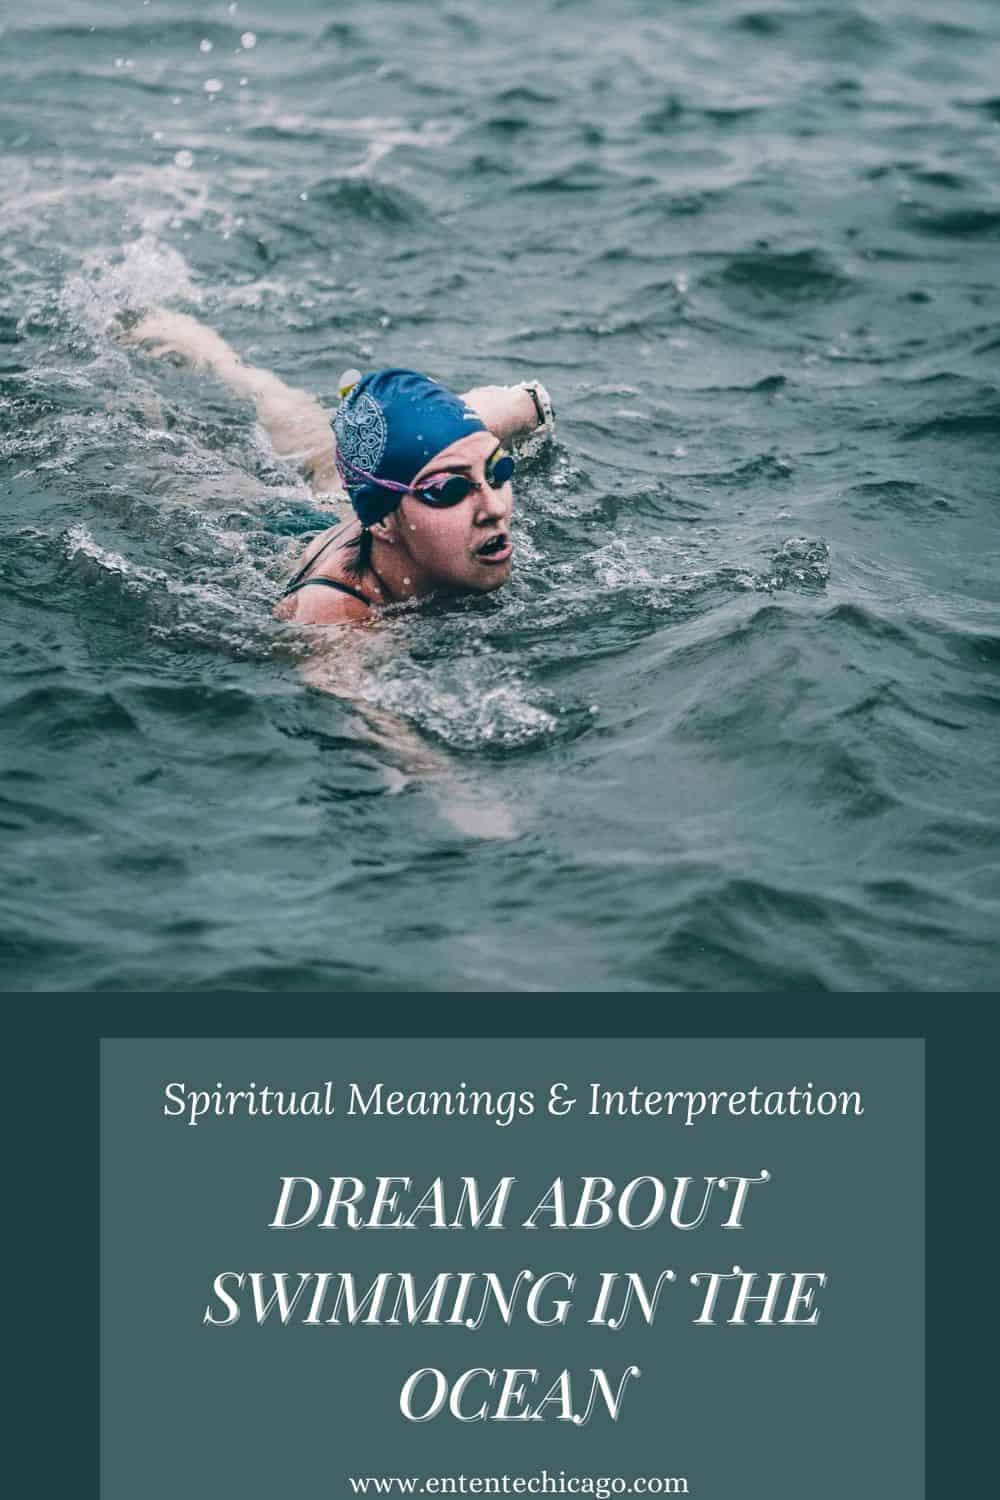 what does it mean when you dream about swimming in the ocean?